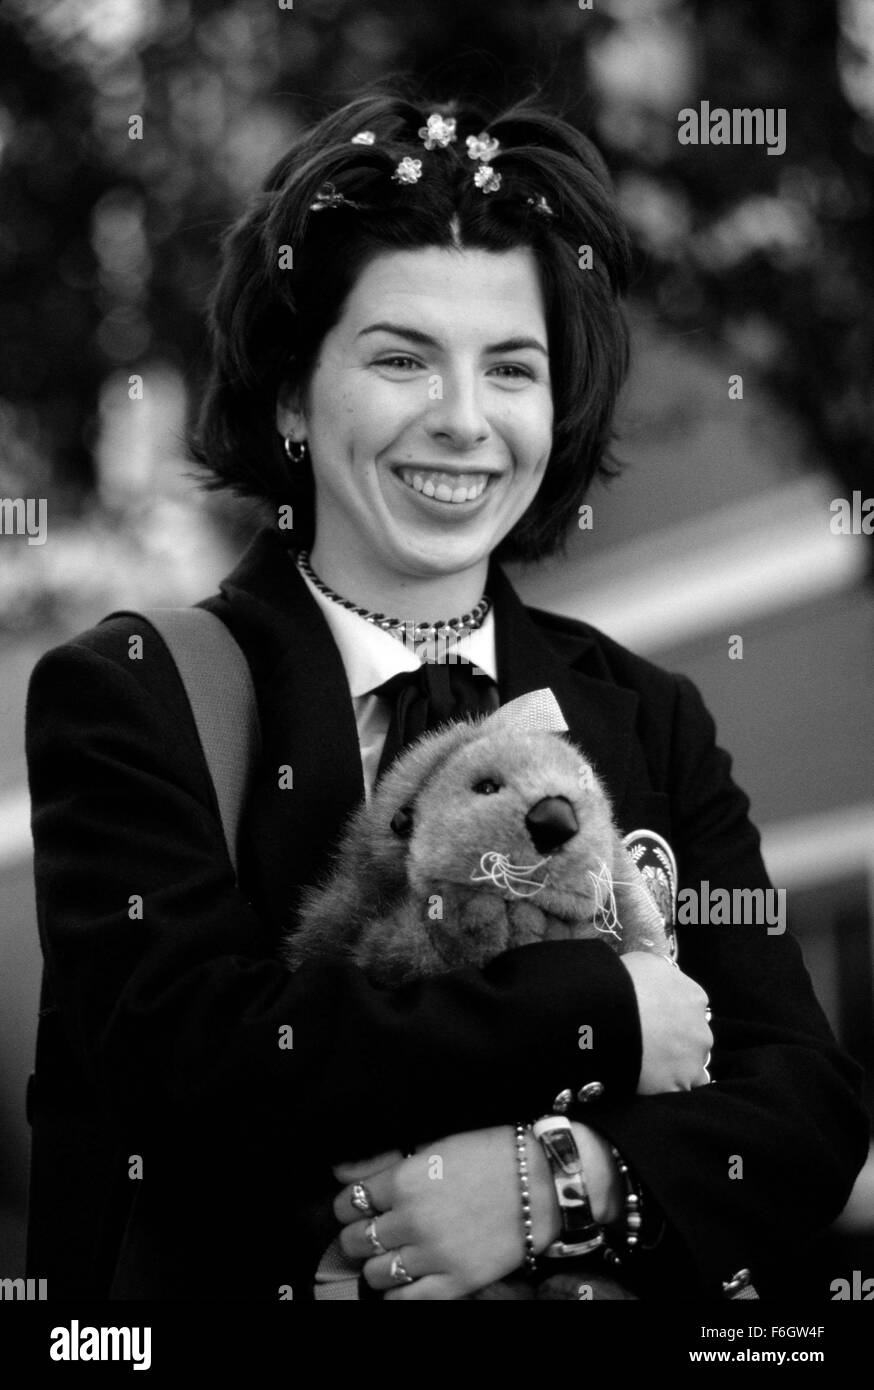 Jul 29, 2001; Los Angeles, CA, USA; HEATHER MATARAZZO stars as Lilly Moscovitz in the family comedy 'The Princess Diaries' directed by Garry Marshall. Stock Photo